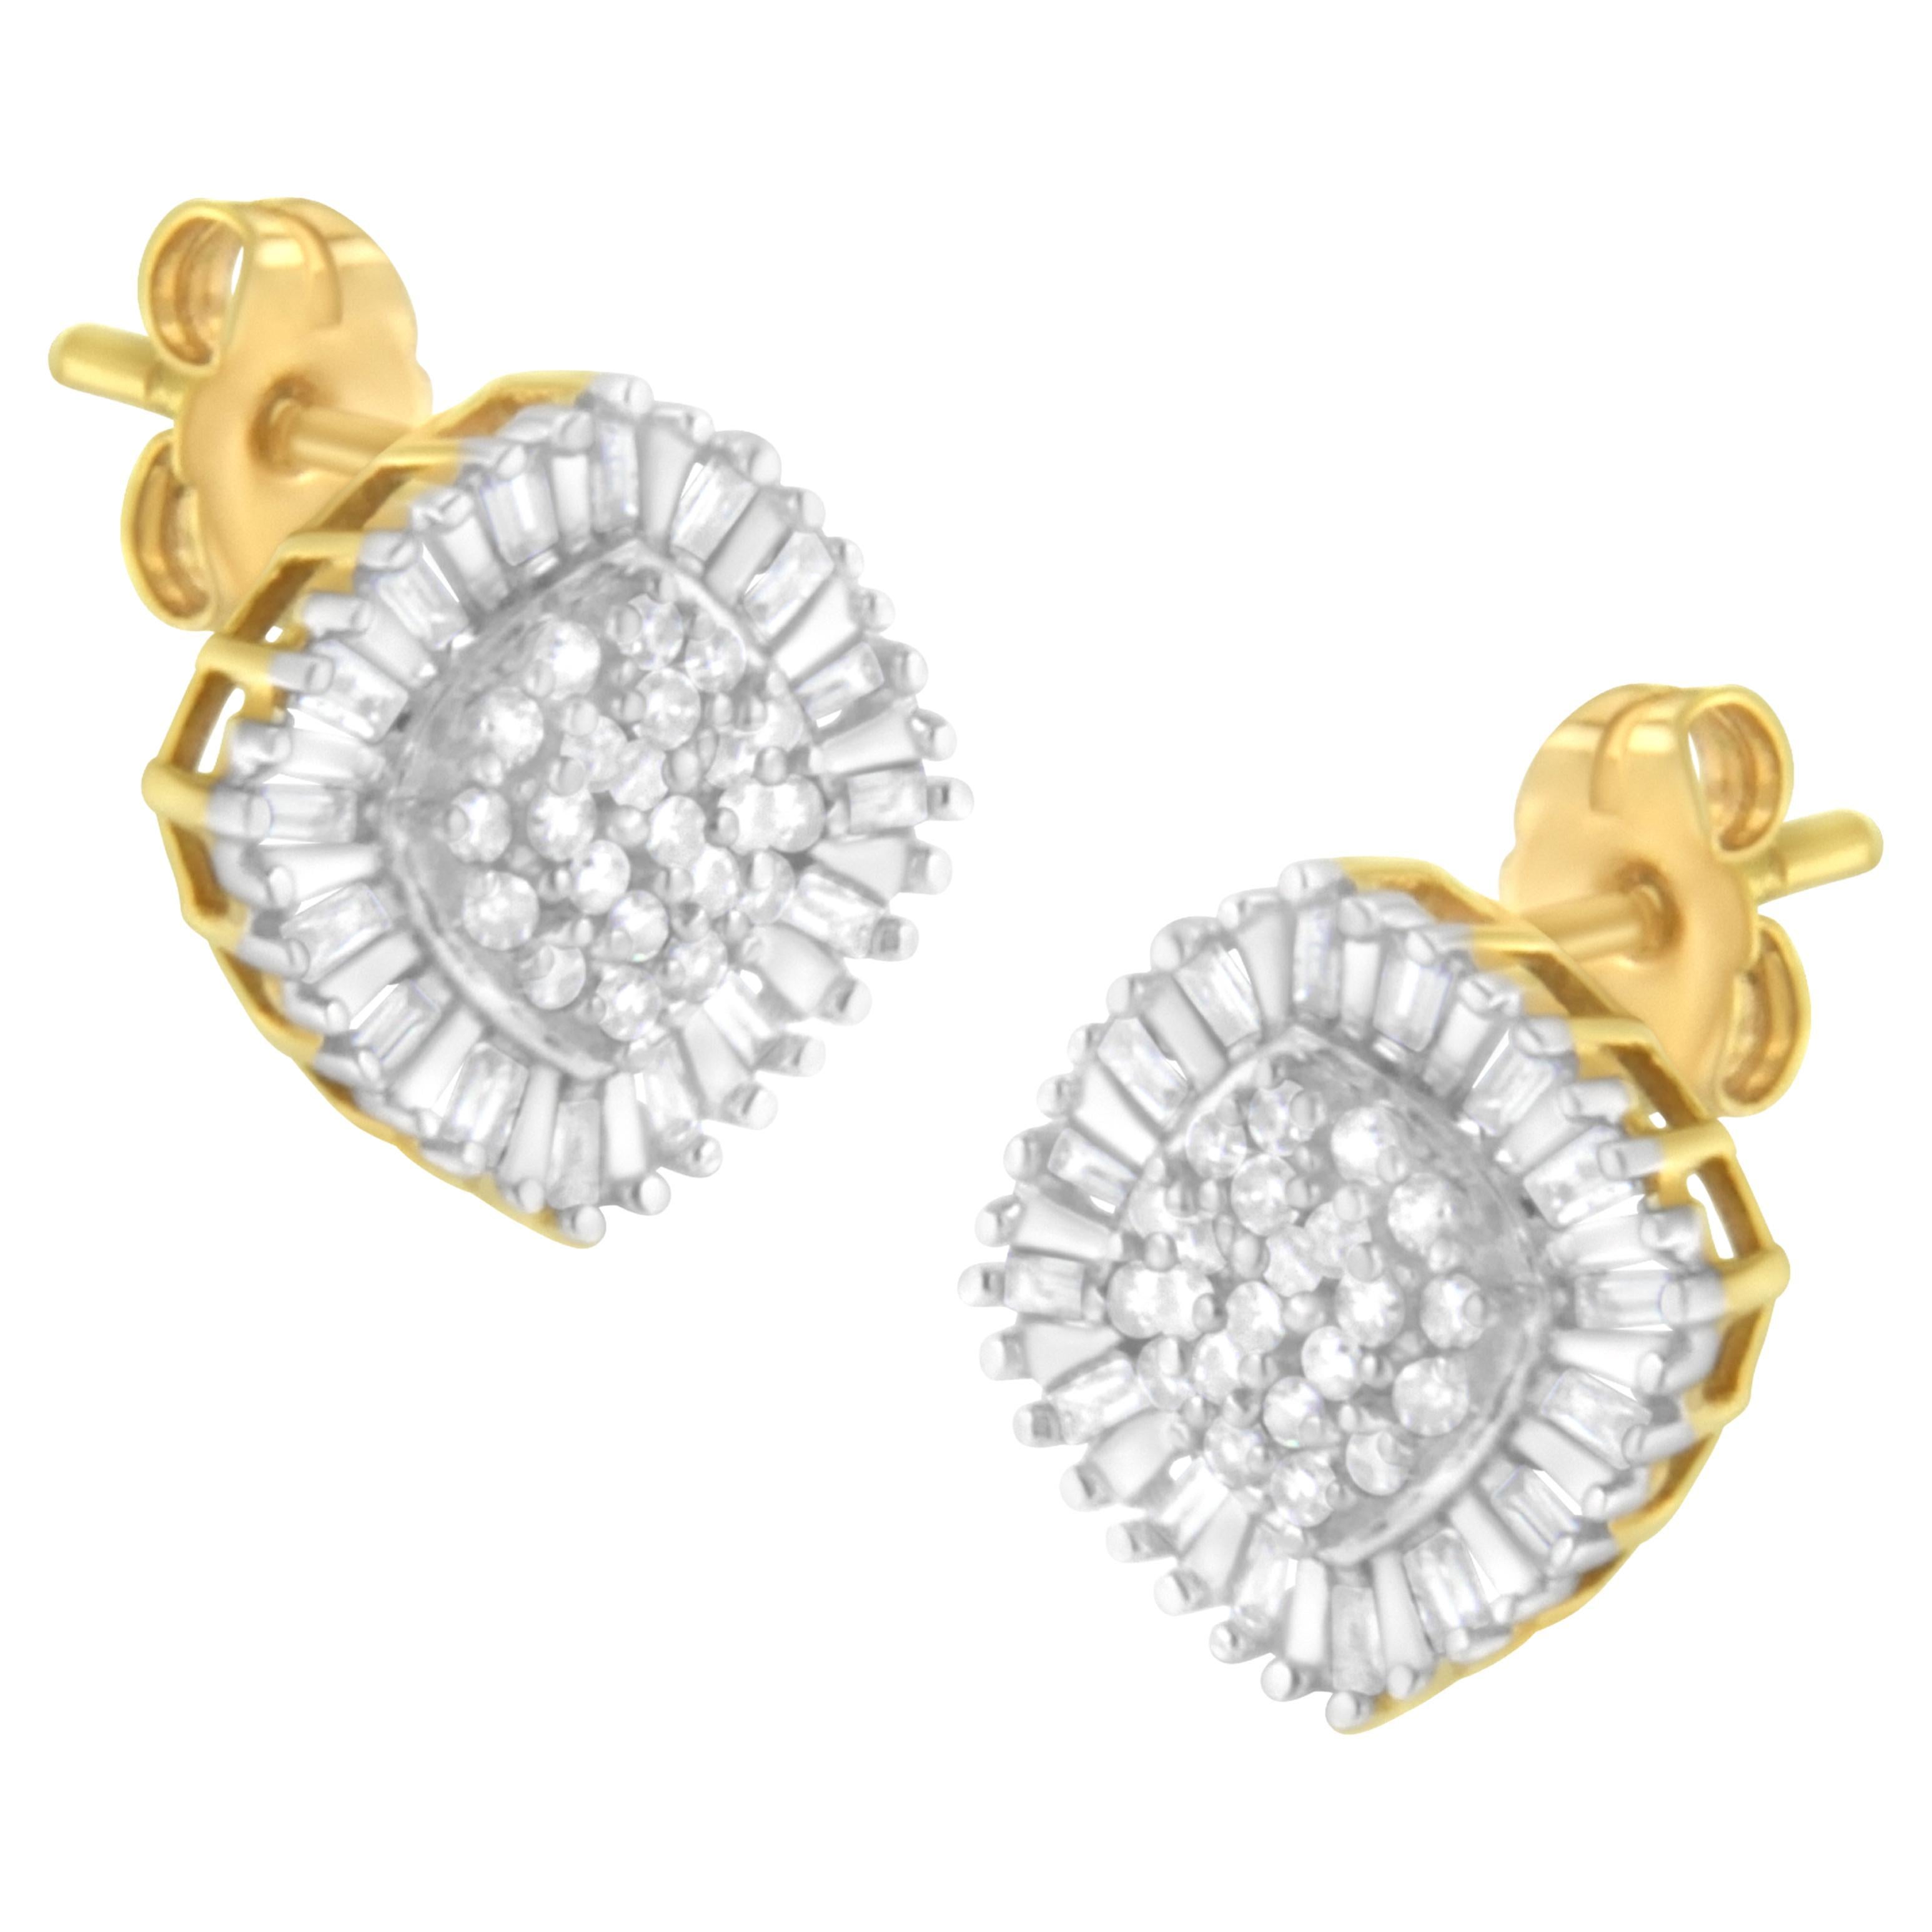 10K Yellow Gold 1/2 Carat Diamond Cluster Cocktail Stud Earrings For Sale